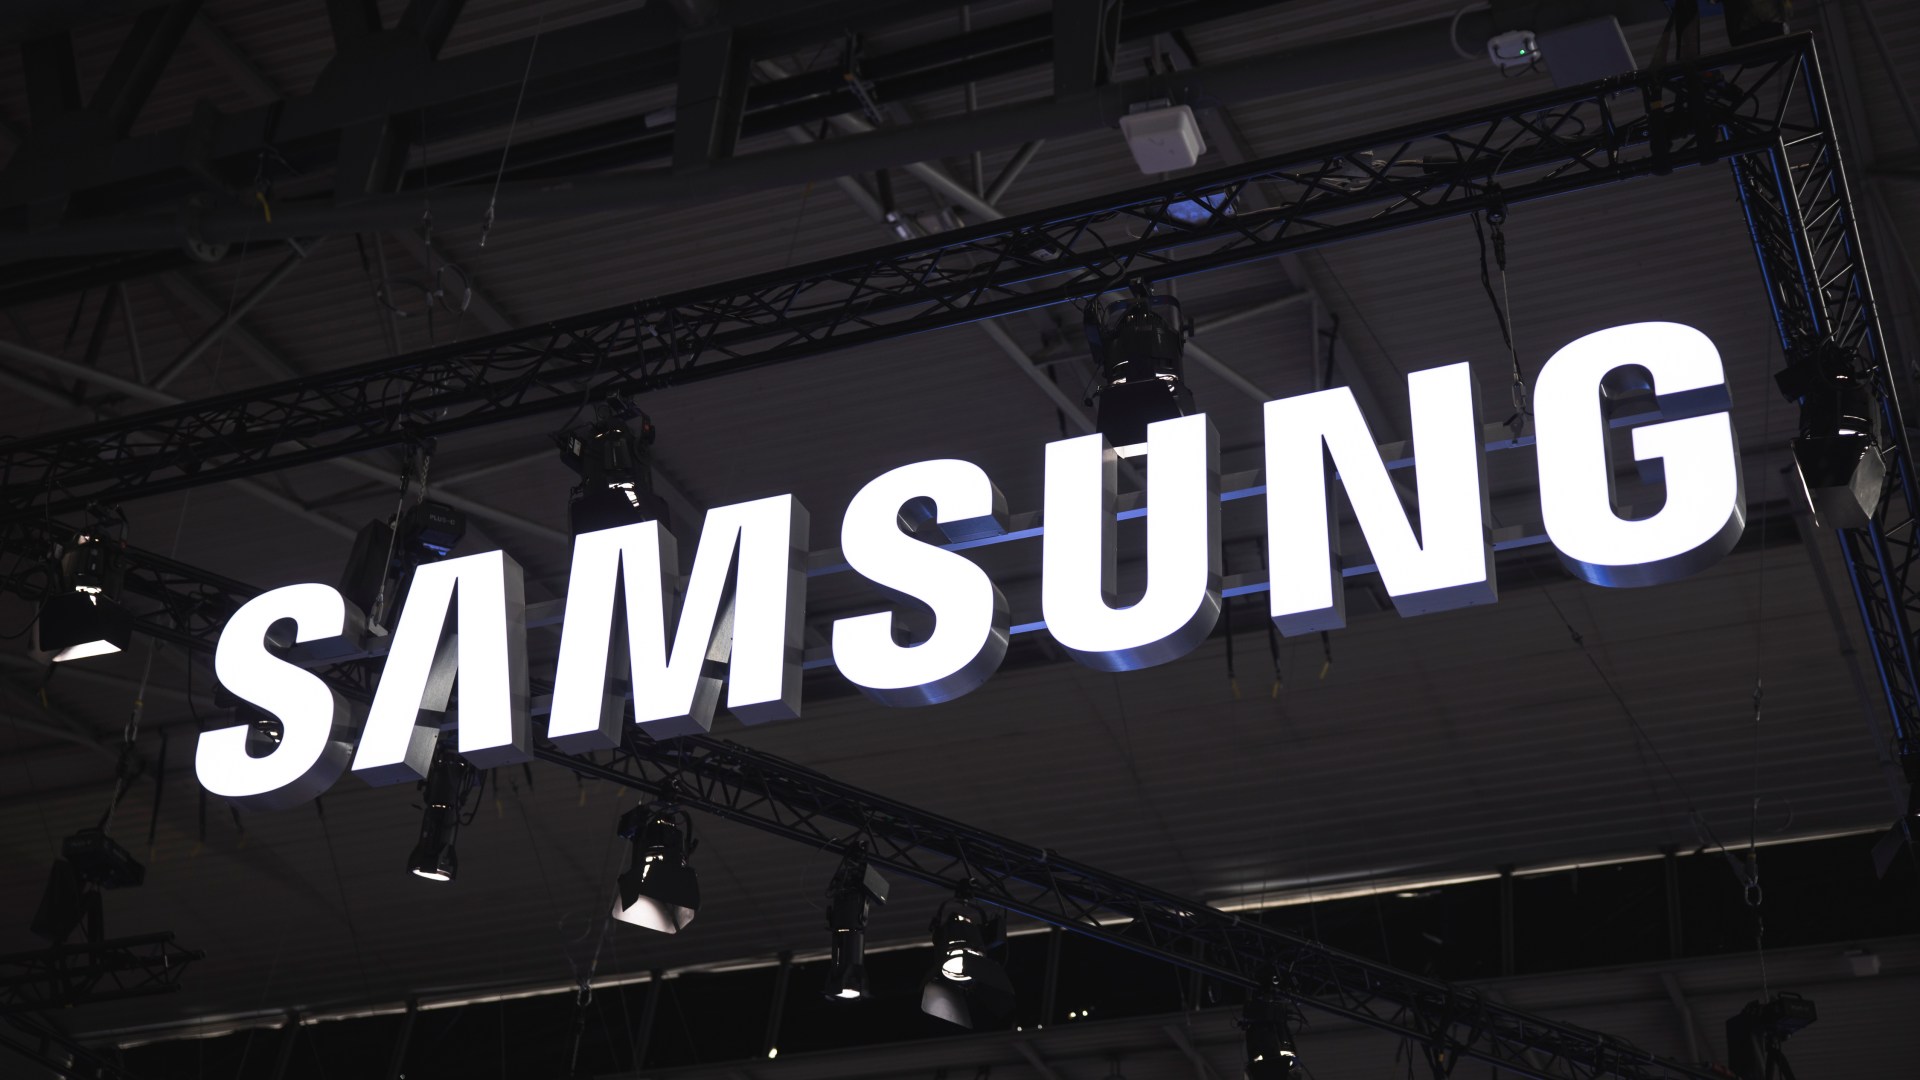 Epic Samsung Move: New Gadget Exclusive for Android Users Leaves Apple Fans in the Dust